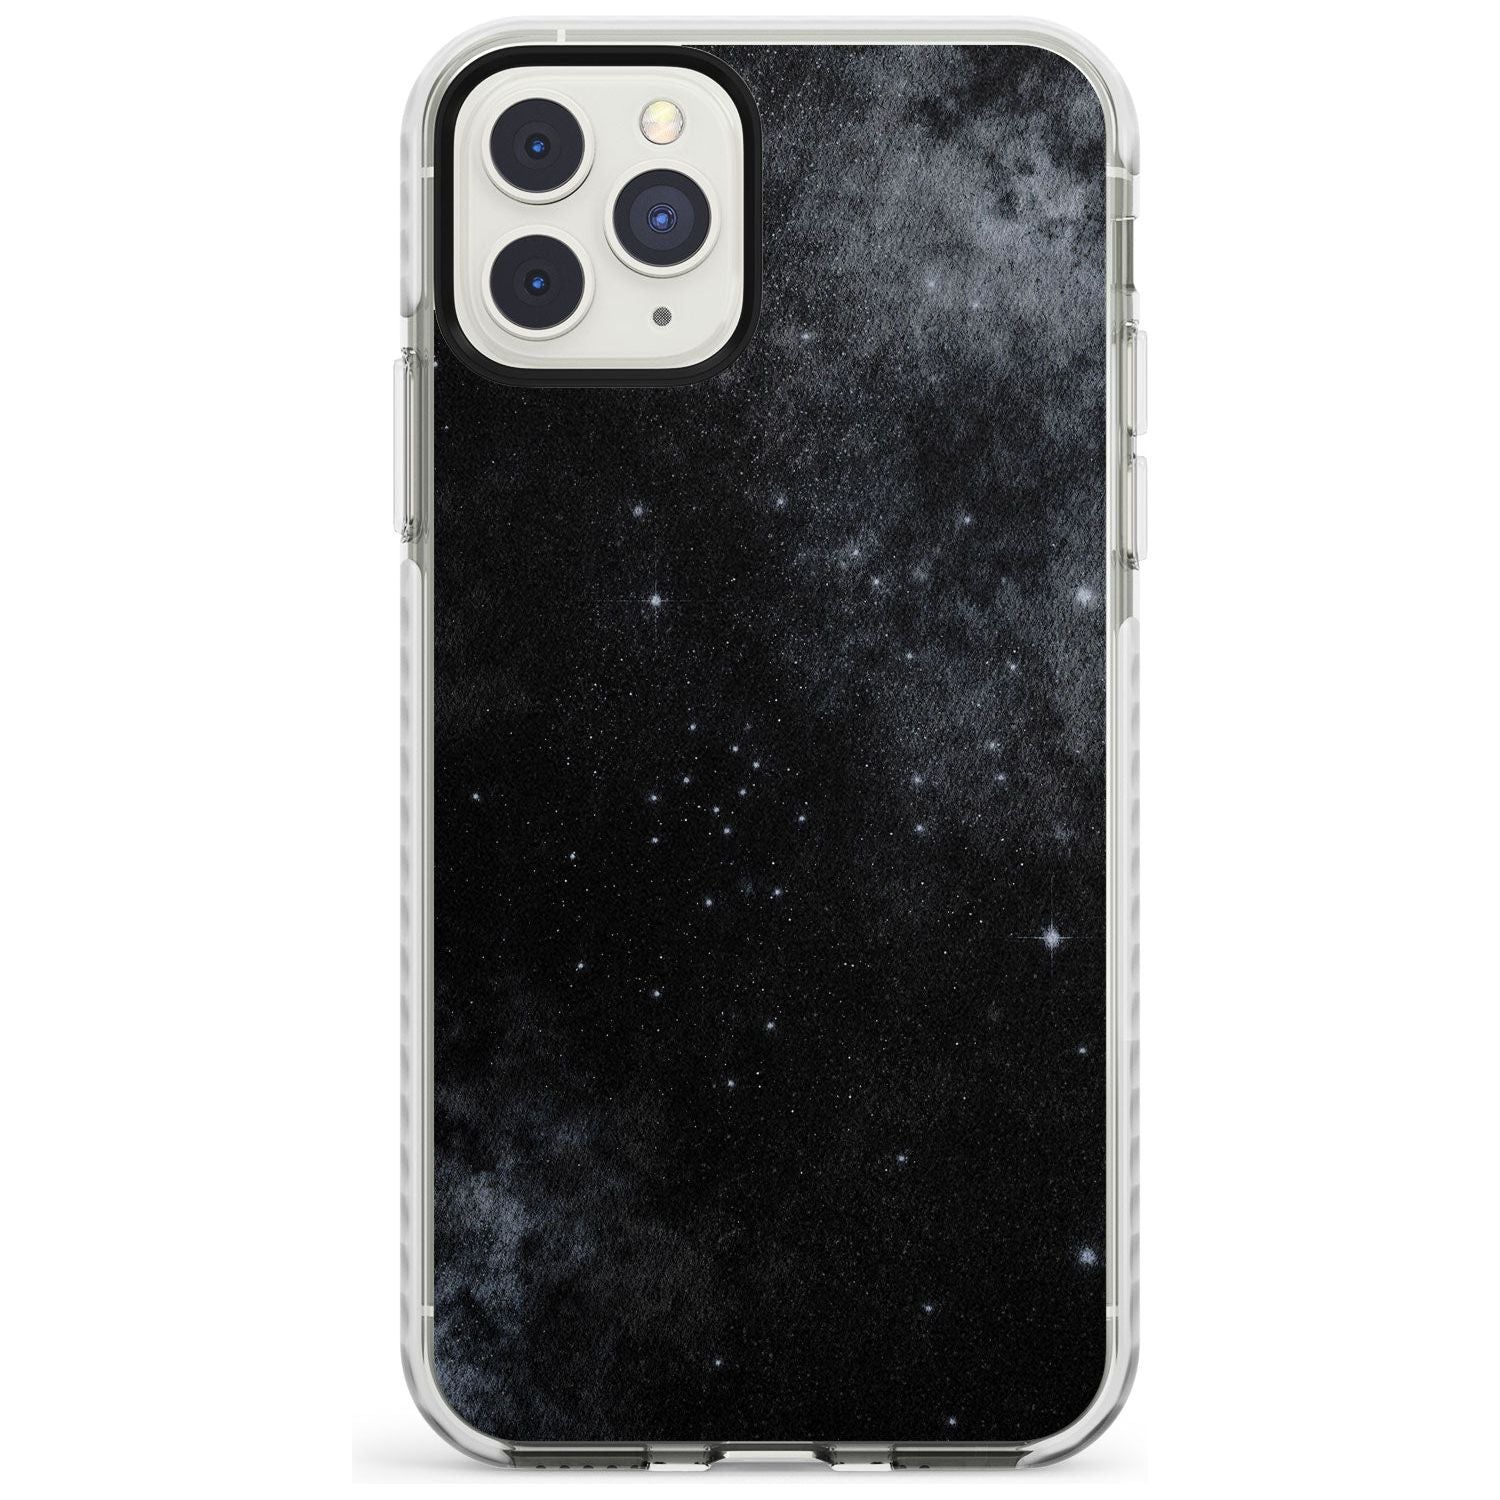 Night Sky Galaxies: Shimmering Stars Phone Case iPhone 11 Pro Max / Impact Case,iPhone 11 Pro / Impact Case,iPhone 12 Pro / Impact Case,iPhone 12 Pro Max / Impact Case Blanc Space